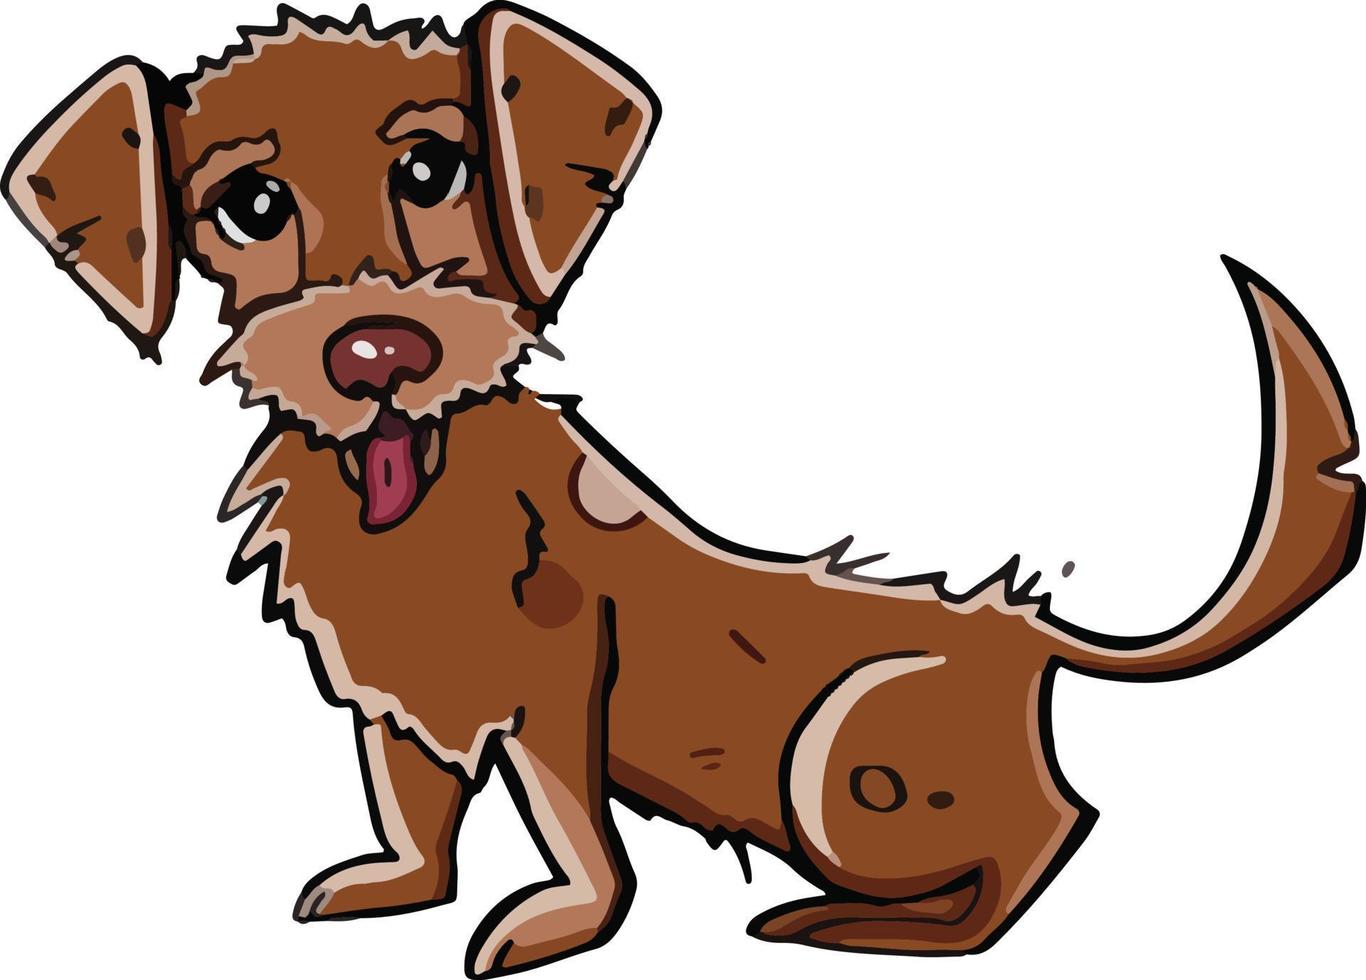 Cartoon style. The dog shows his tongue, the puppy opened his mouth. vector illustration